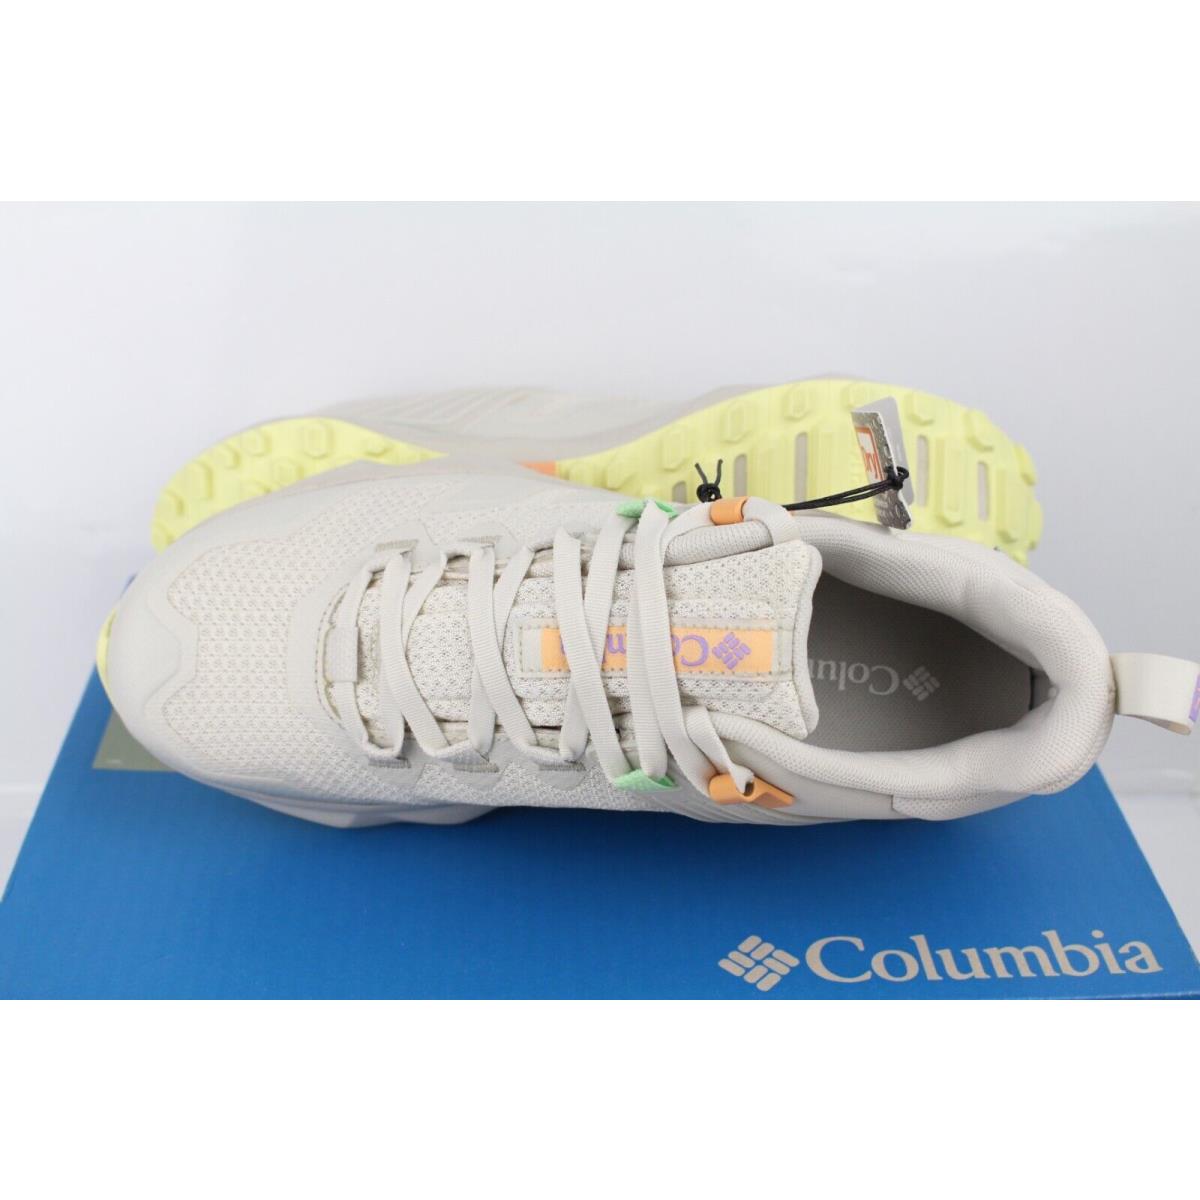 Columbia shoes  - Beige 1